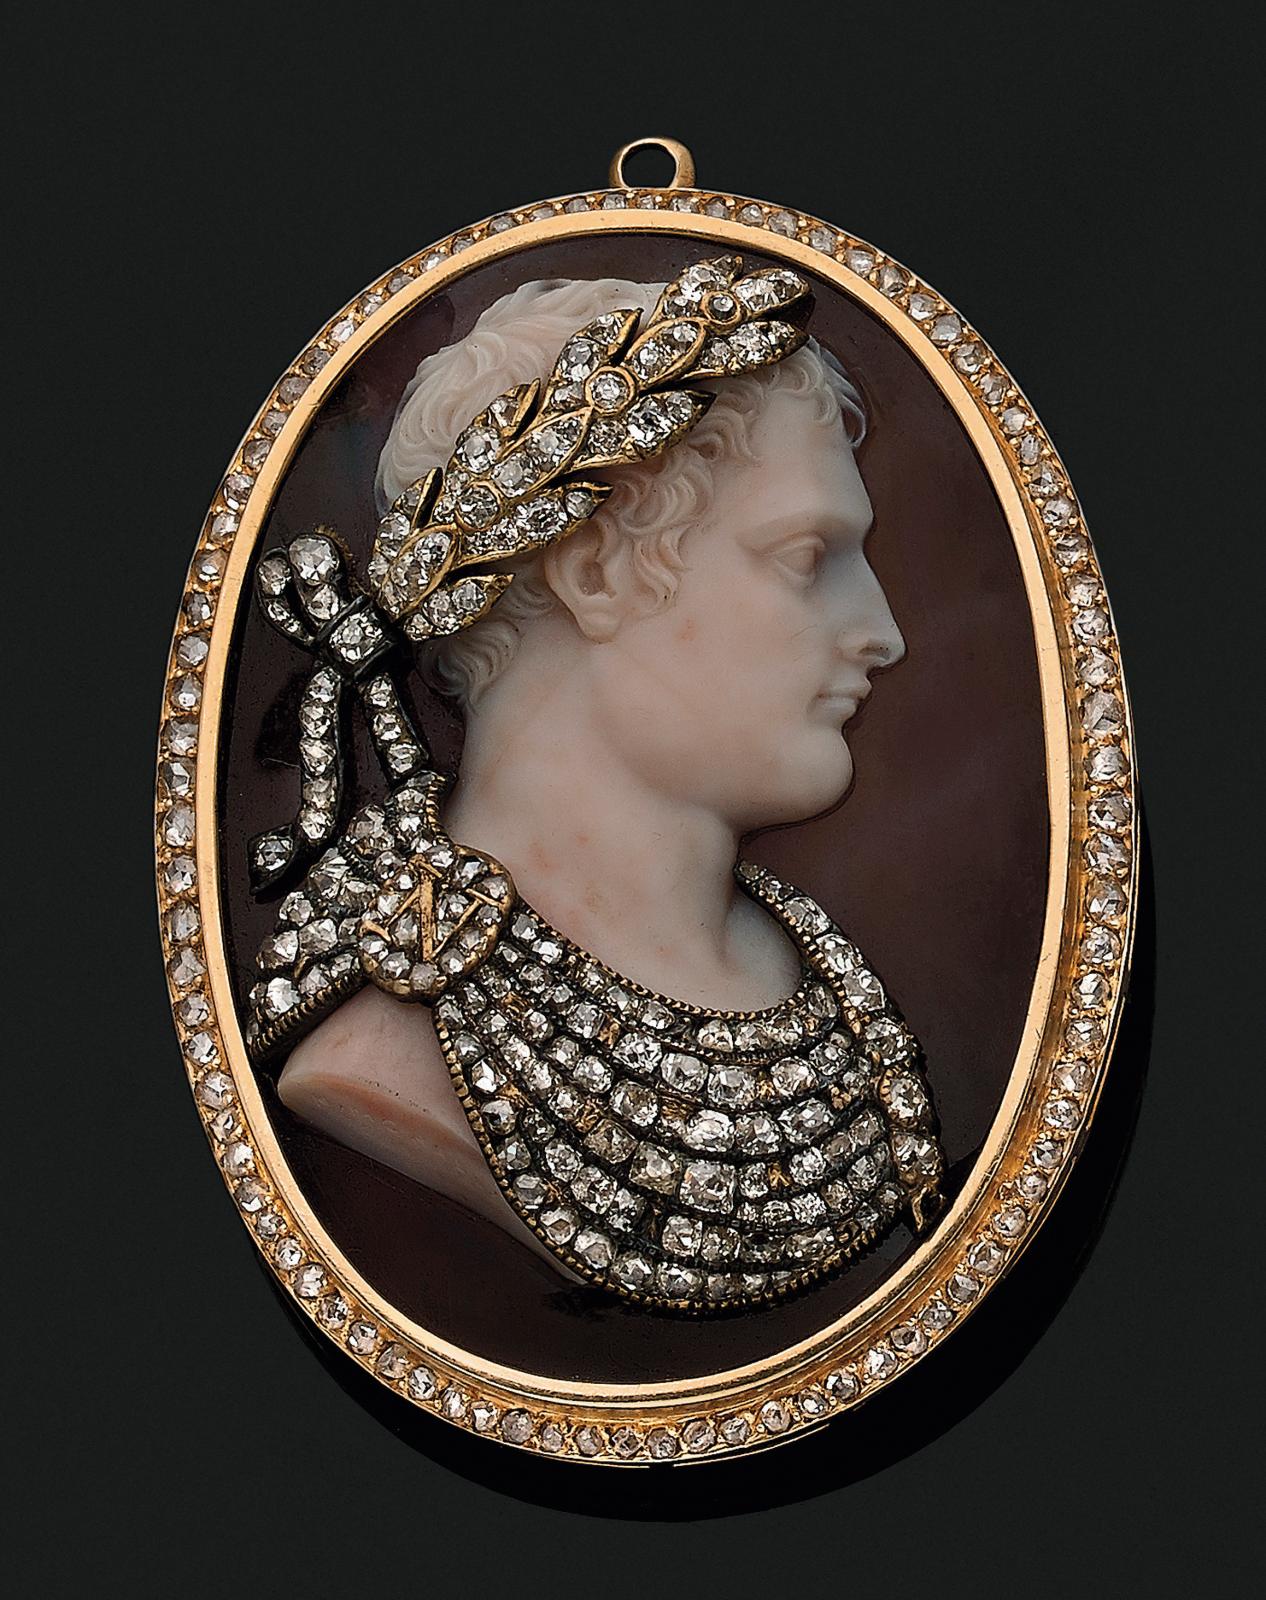 Nicola Morelli (1771-1838), neck medallion adapted to a brooch with a two-layered agate cameo the bust of Emperor Napoleon I in profile in